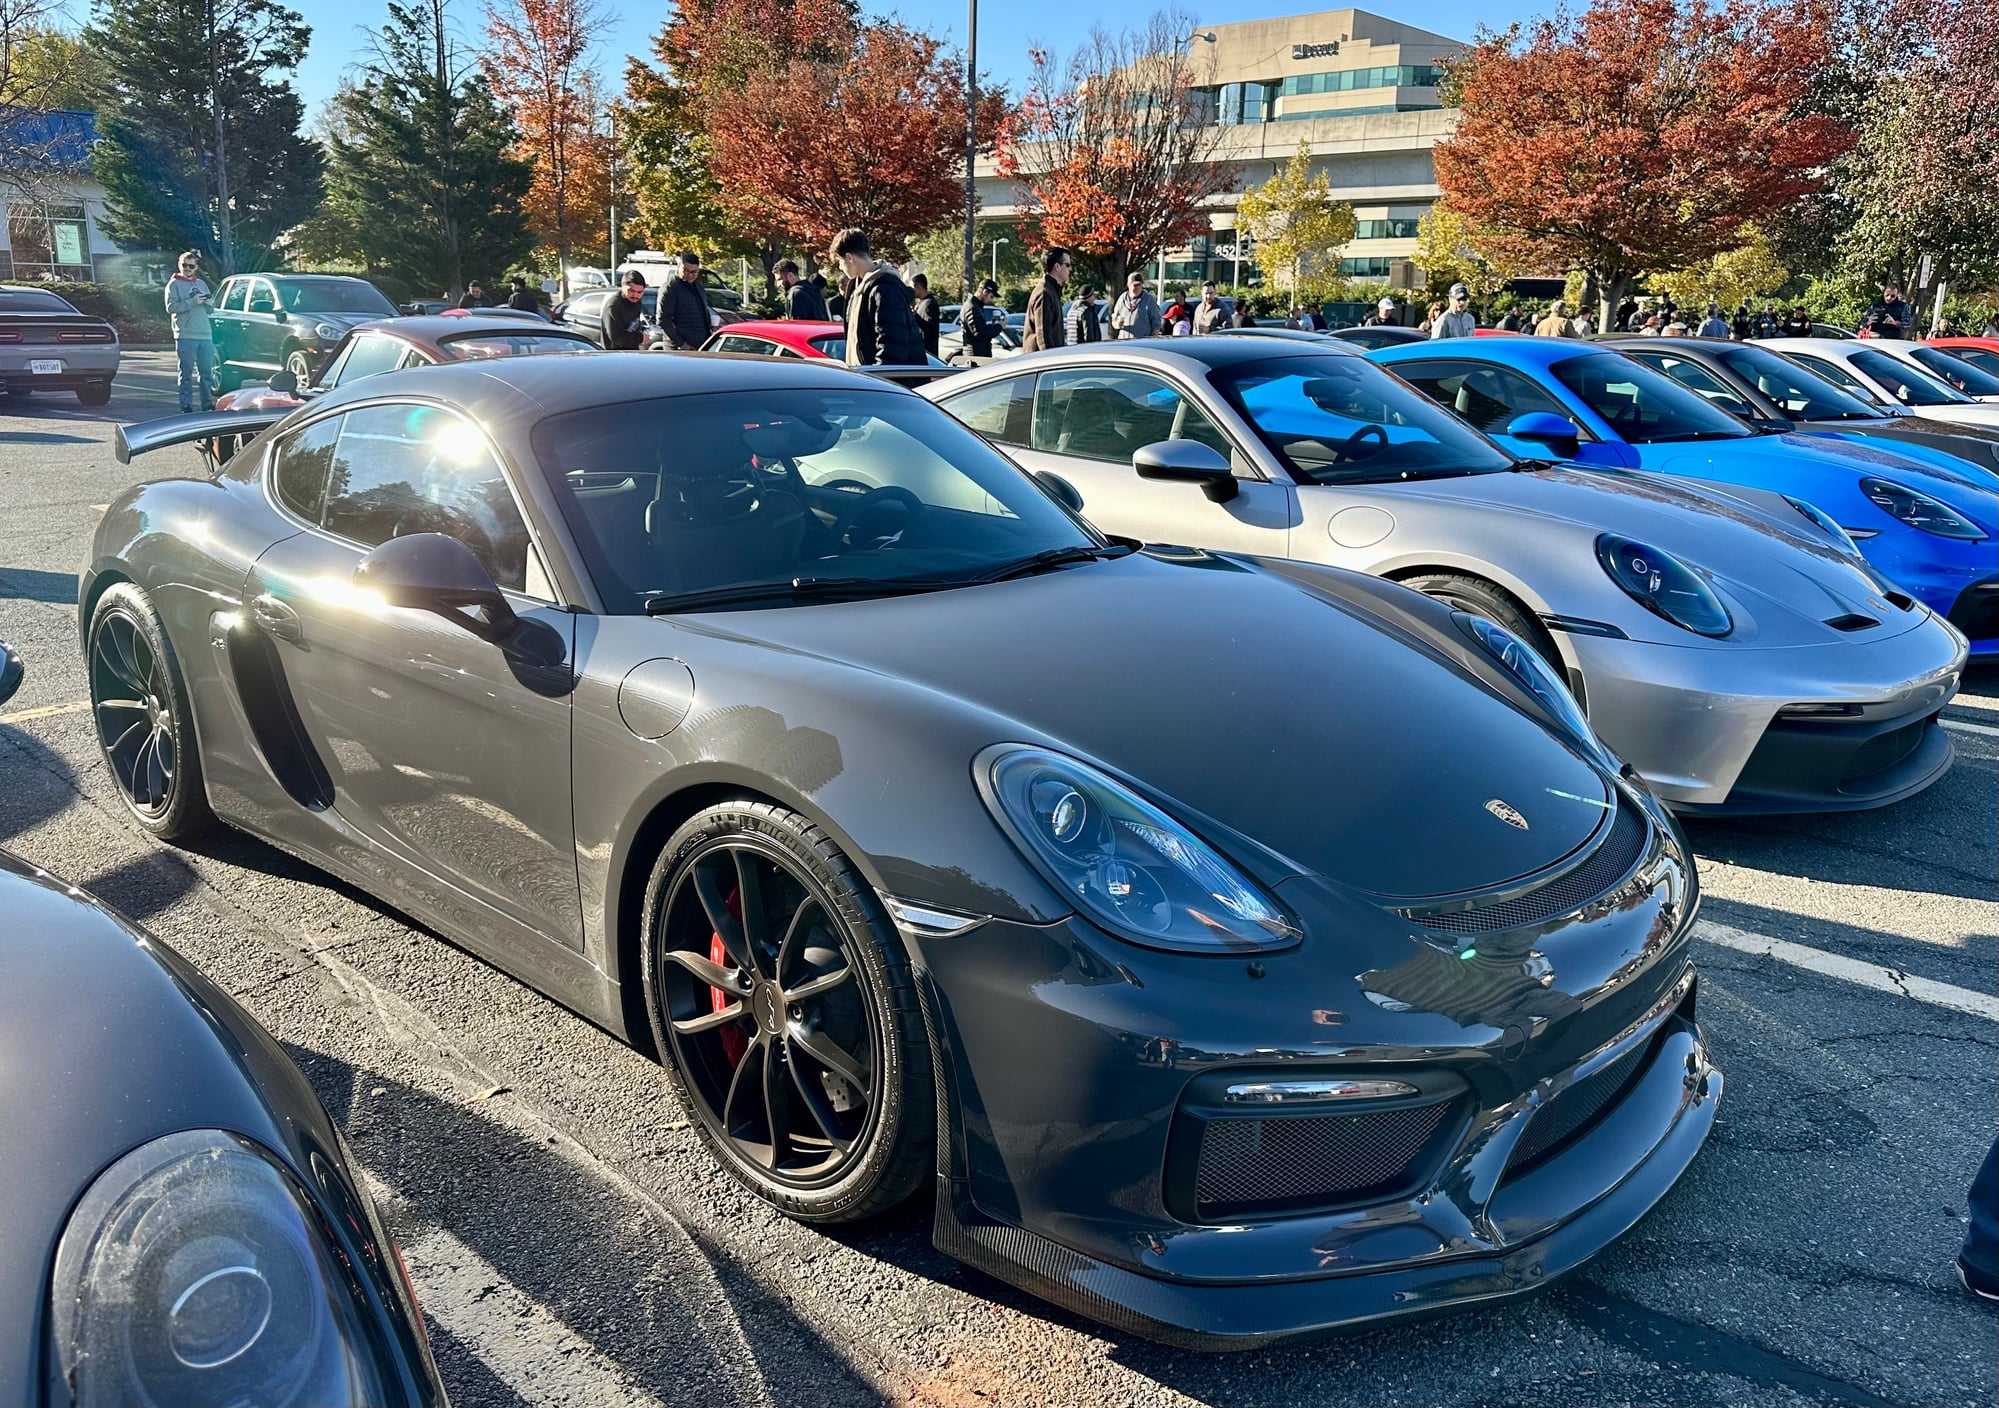 2016 Porsche Cayman GT4 - 1 of 1 PTS Grey-Black 981 GT4 For Sale - Used - VIN WP0AC2A86GK191224 - 19,800 Miles - 6 cyl - 2WD - Manual - Coupe - Other - Haymarket, VA 20169, United States